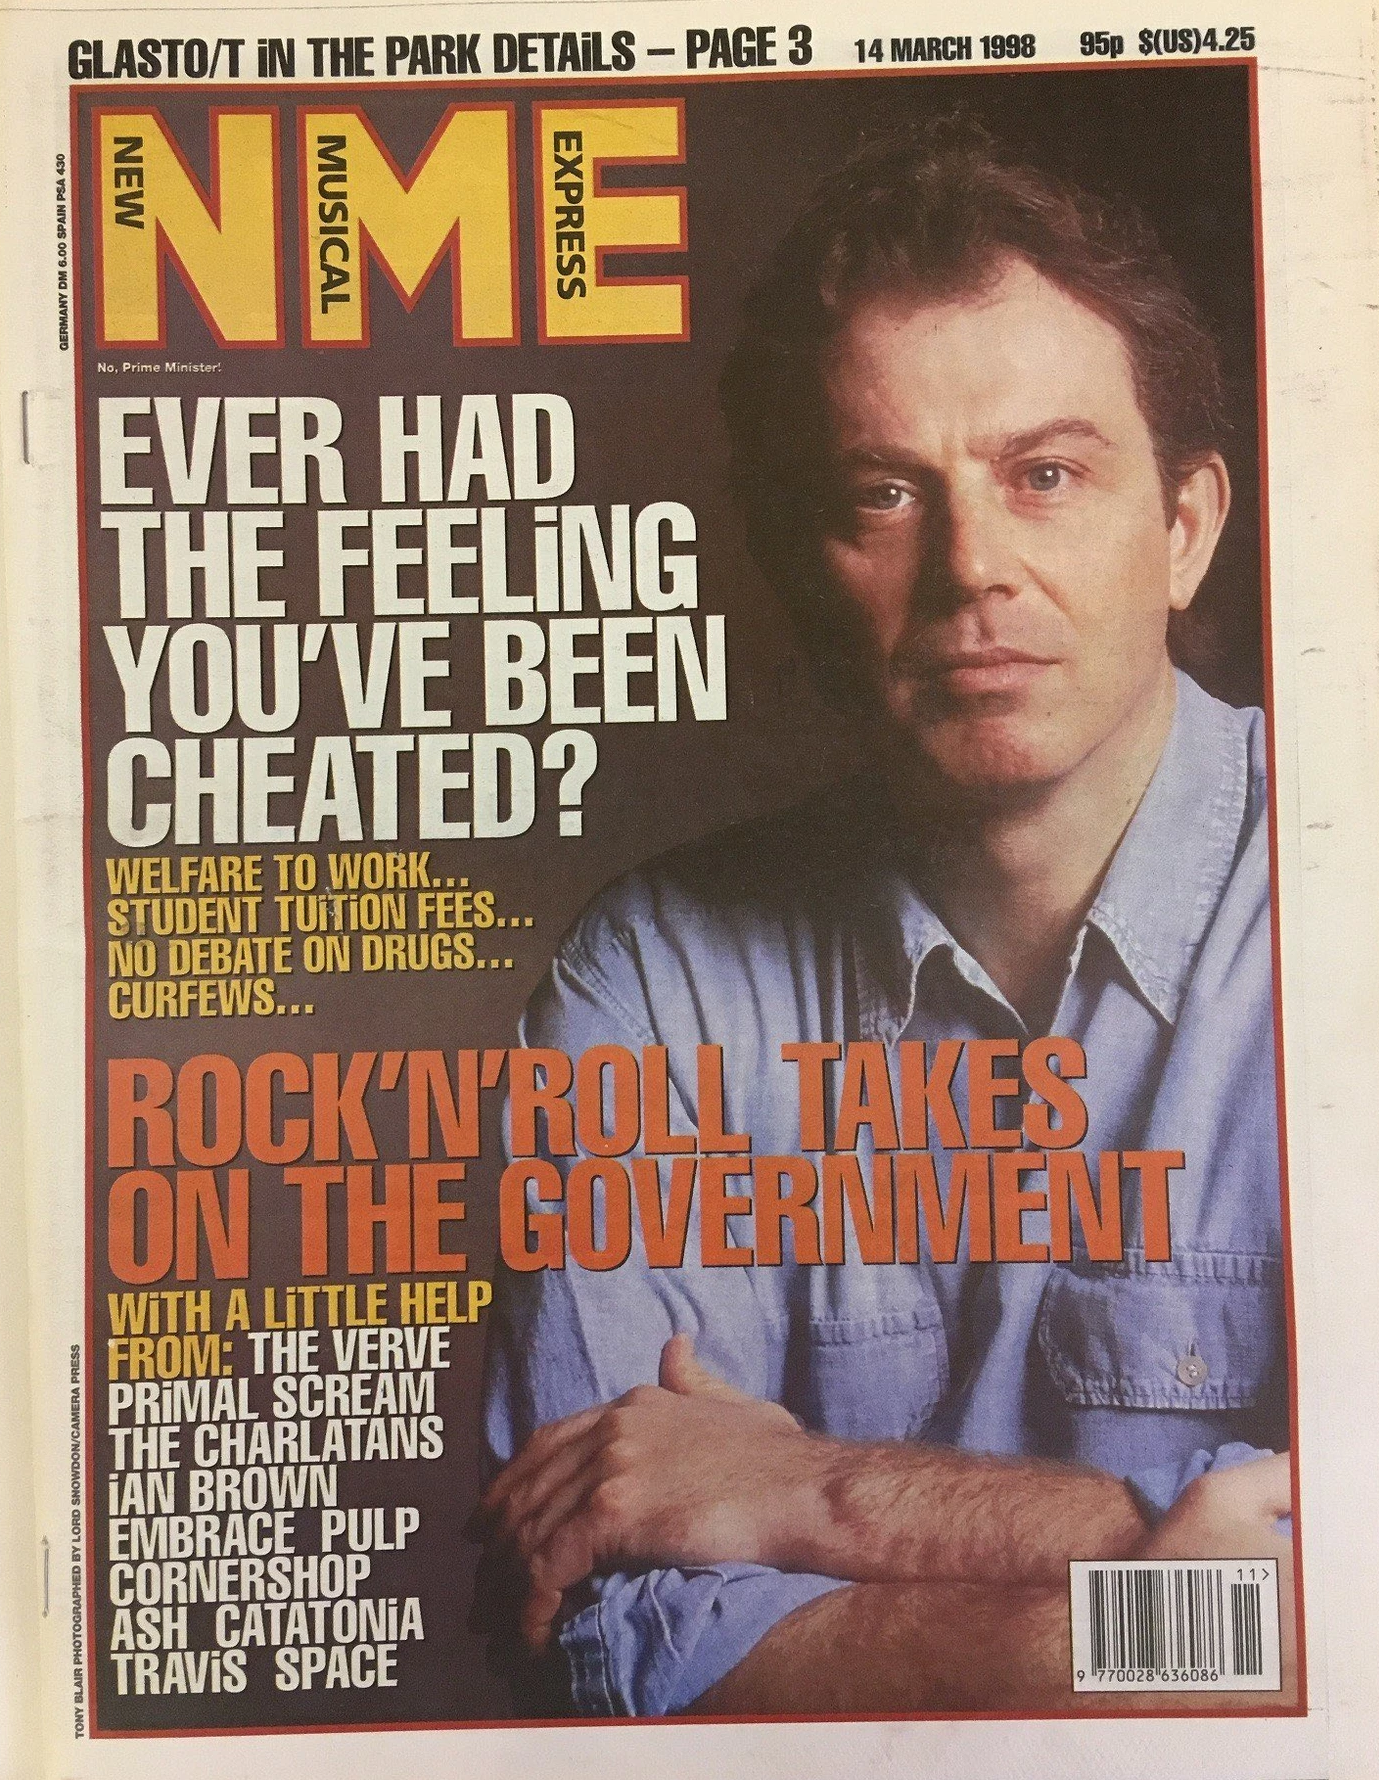 NME cover March 14, 1998, featuring Tony Blair, headlined Ever Had The Feeling You've Been Cheated? Rock N' Roll Takes on the Government